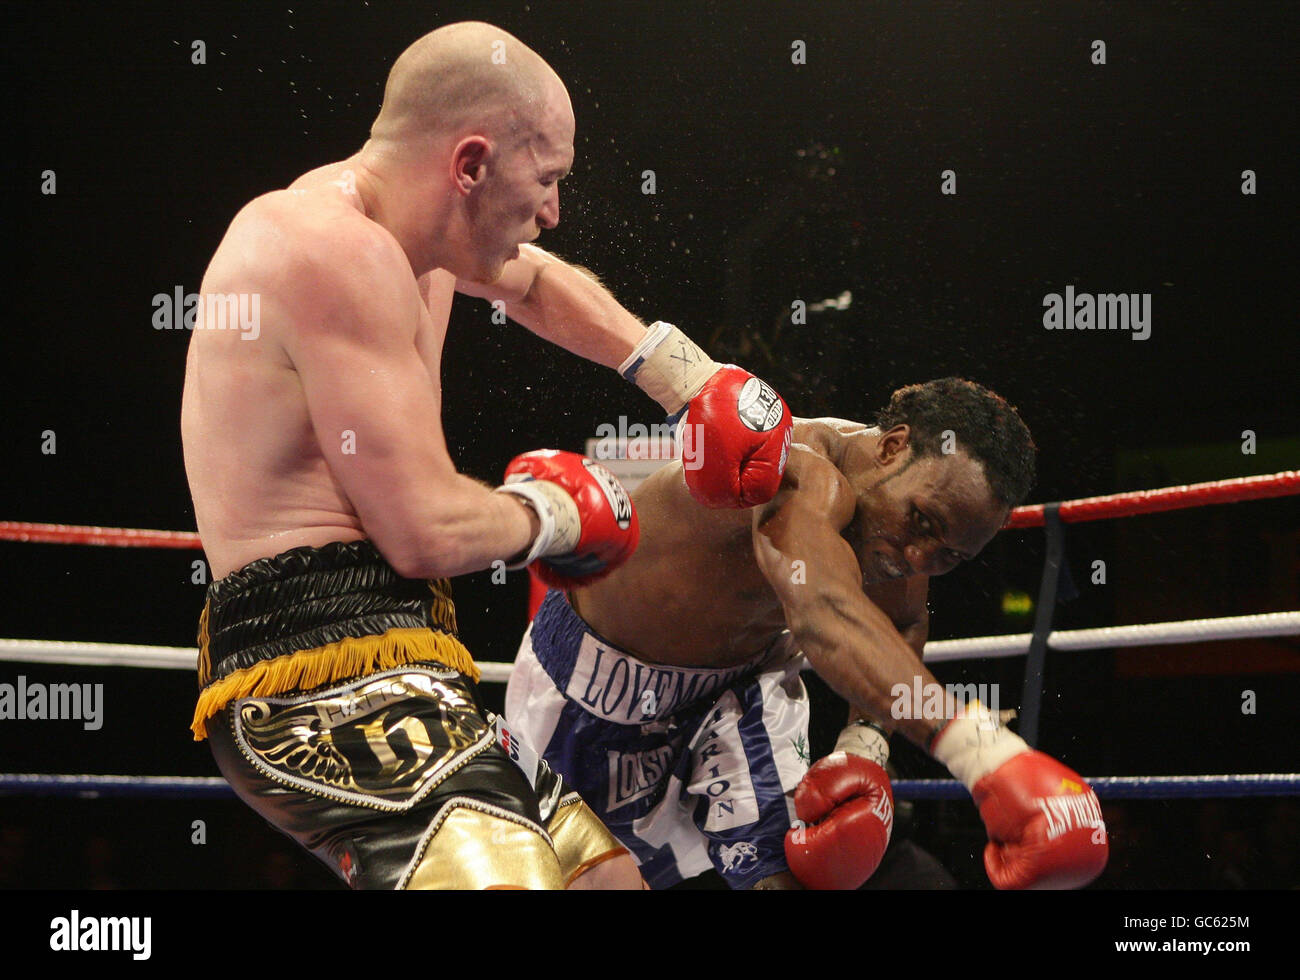 Matthew Hatton (left) in action against Lovemore N'Dou (right) during their IBO Welterweight Title fight at the Fenton Manor Sports Complex, Stoke on Trent. Stock Photo